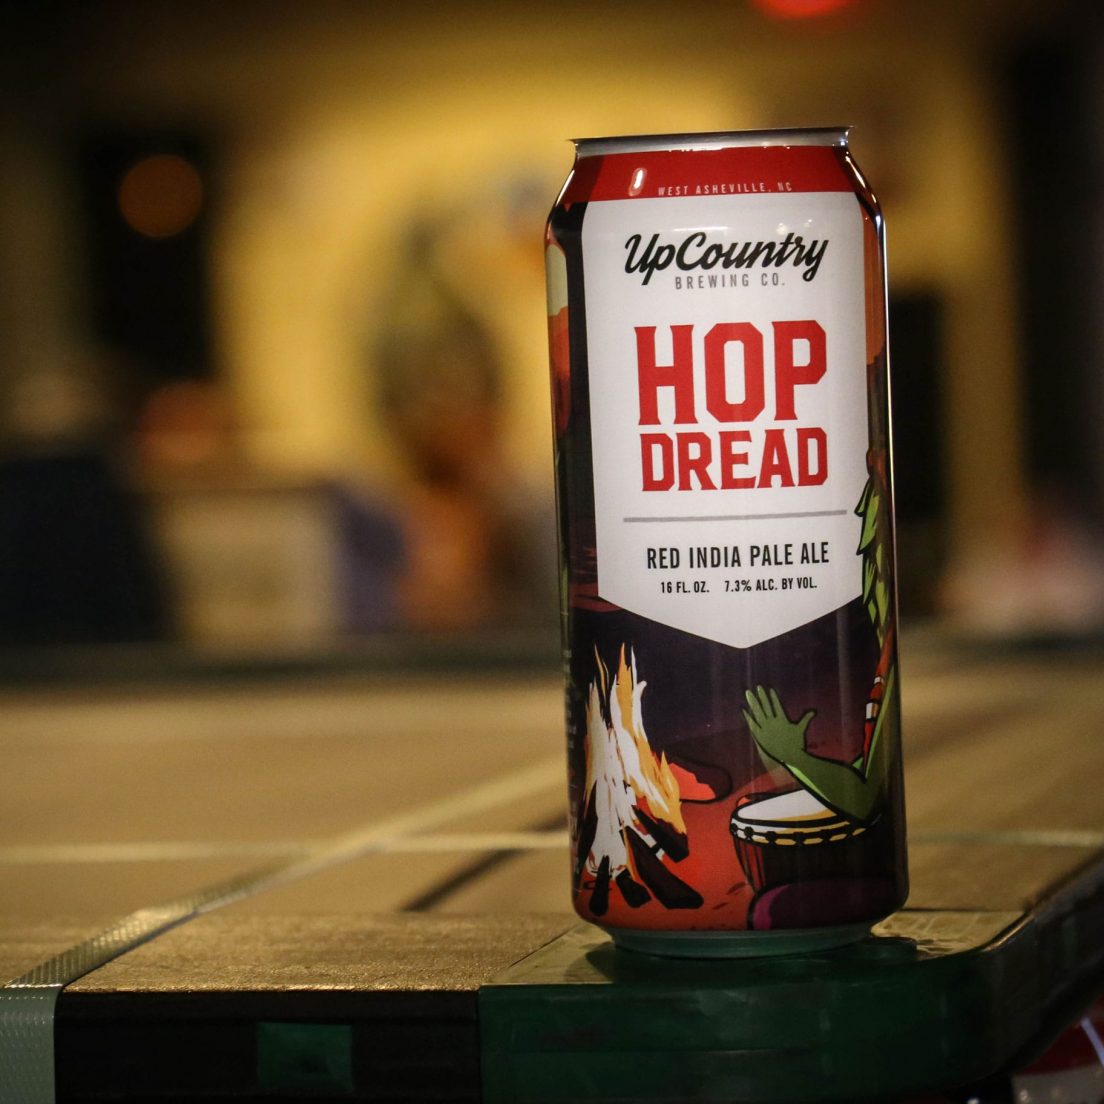 UpCountry Hop Dread can